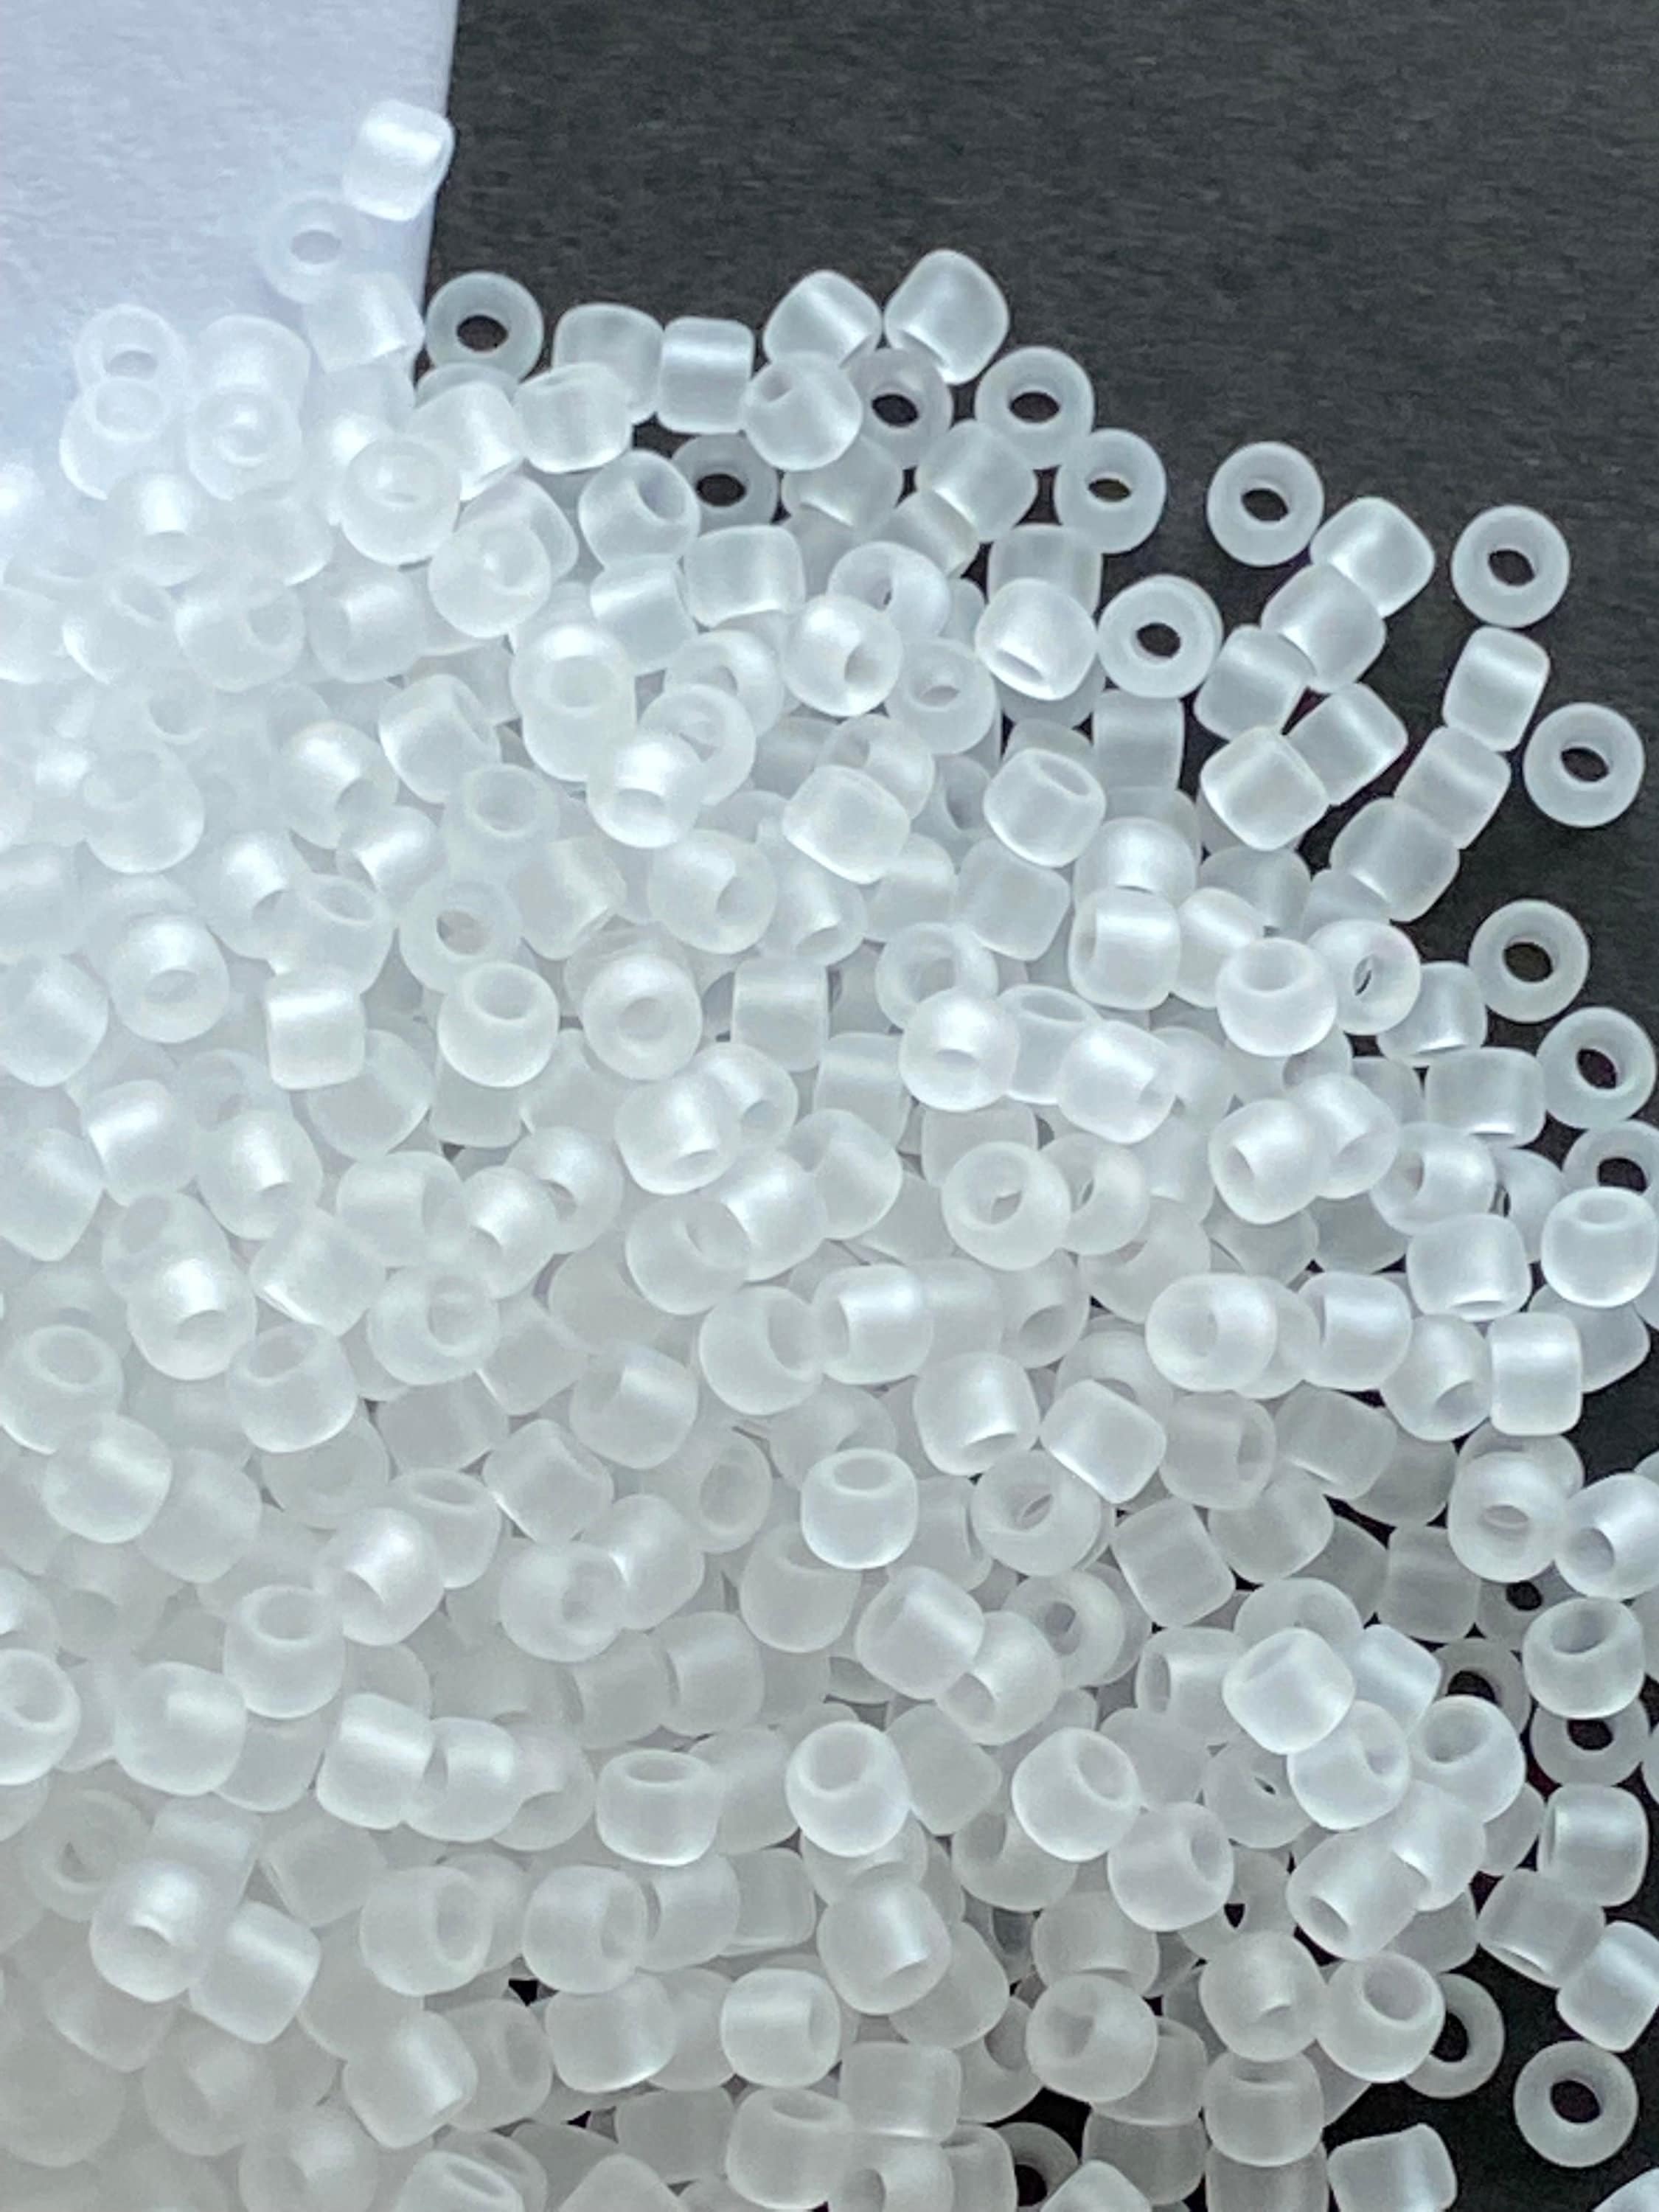 TR-08-1F Beads for clothing Clear frosted seed bead Jewelry beads #8 Toho clear matte seed bead Clear beads for embellishment